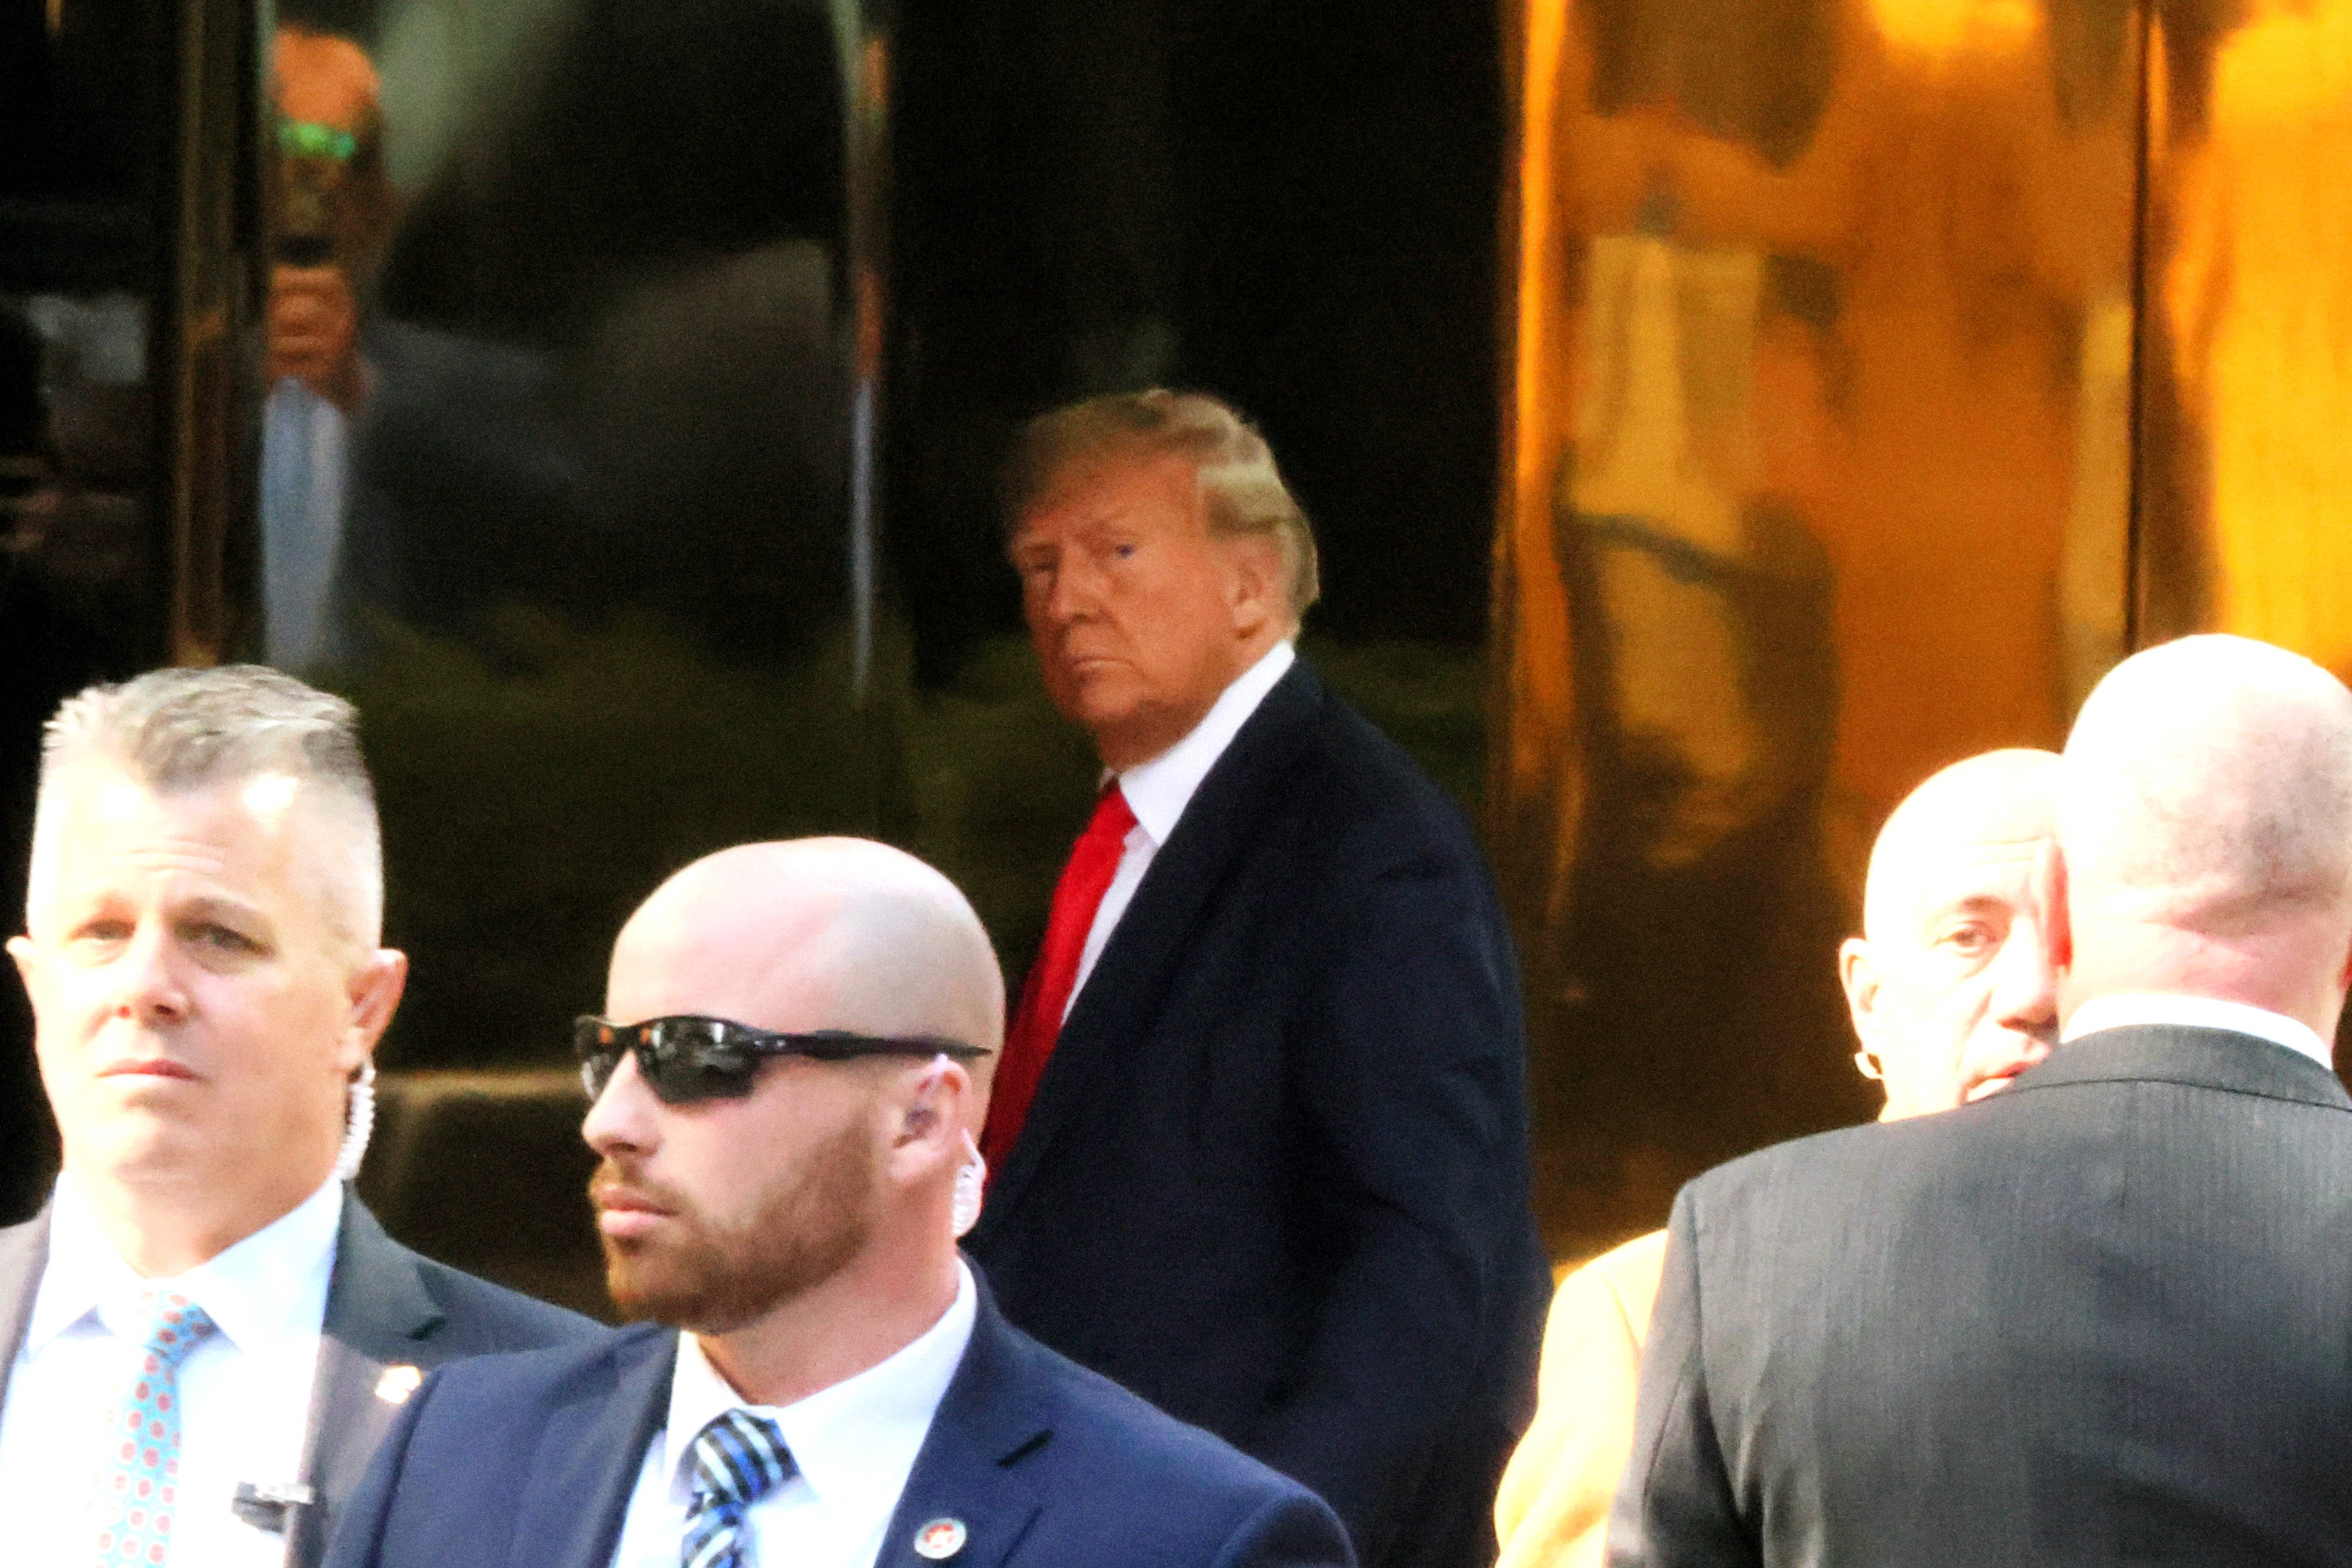 Former President Donald Trump arrives at Trump Tower on 3 April 2023